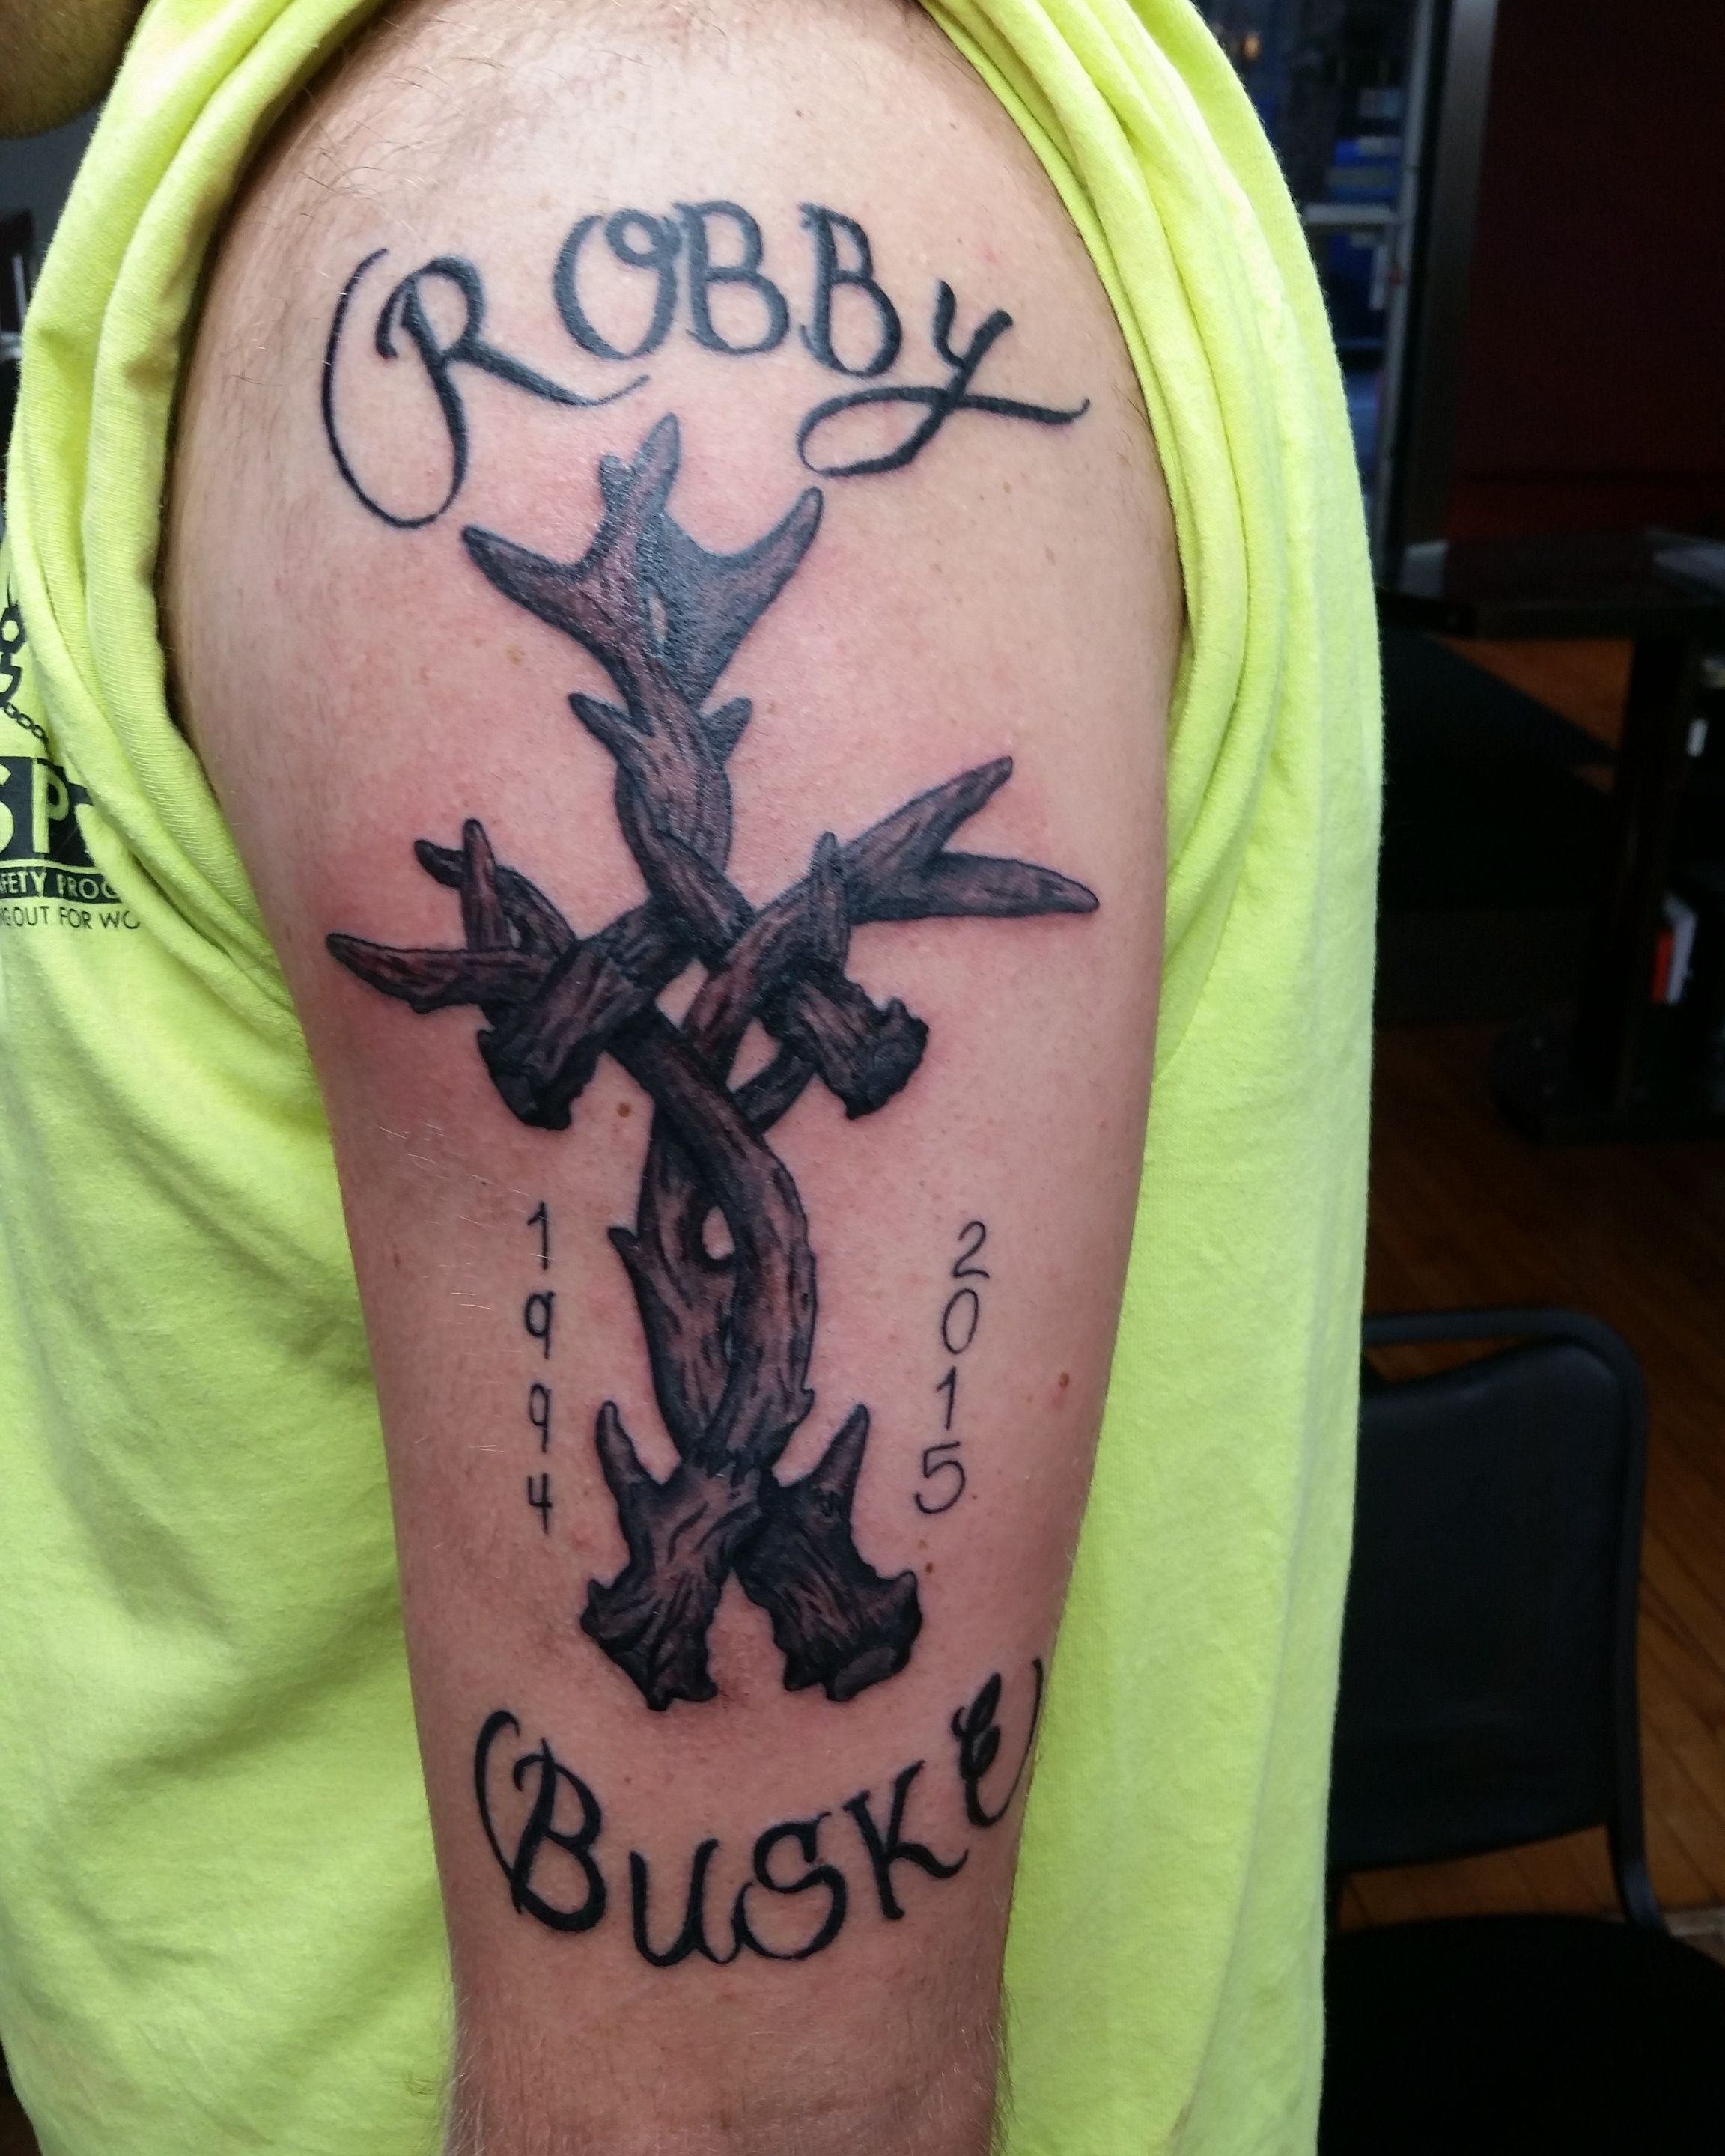 Tattoo Done Jake Faldet At Firehouse Tattoo In Stoughton Wi within sizing 2304 X 2880